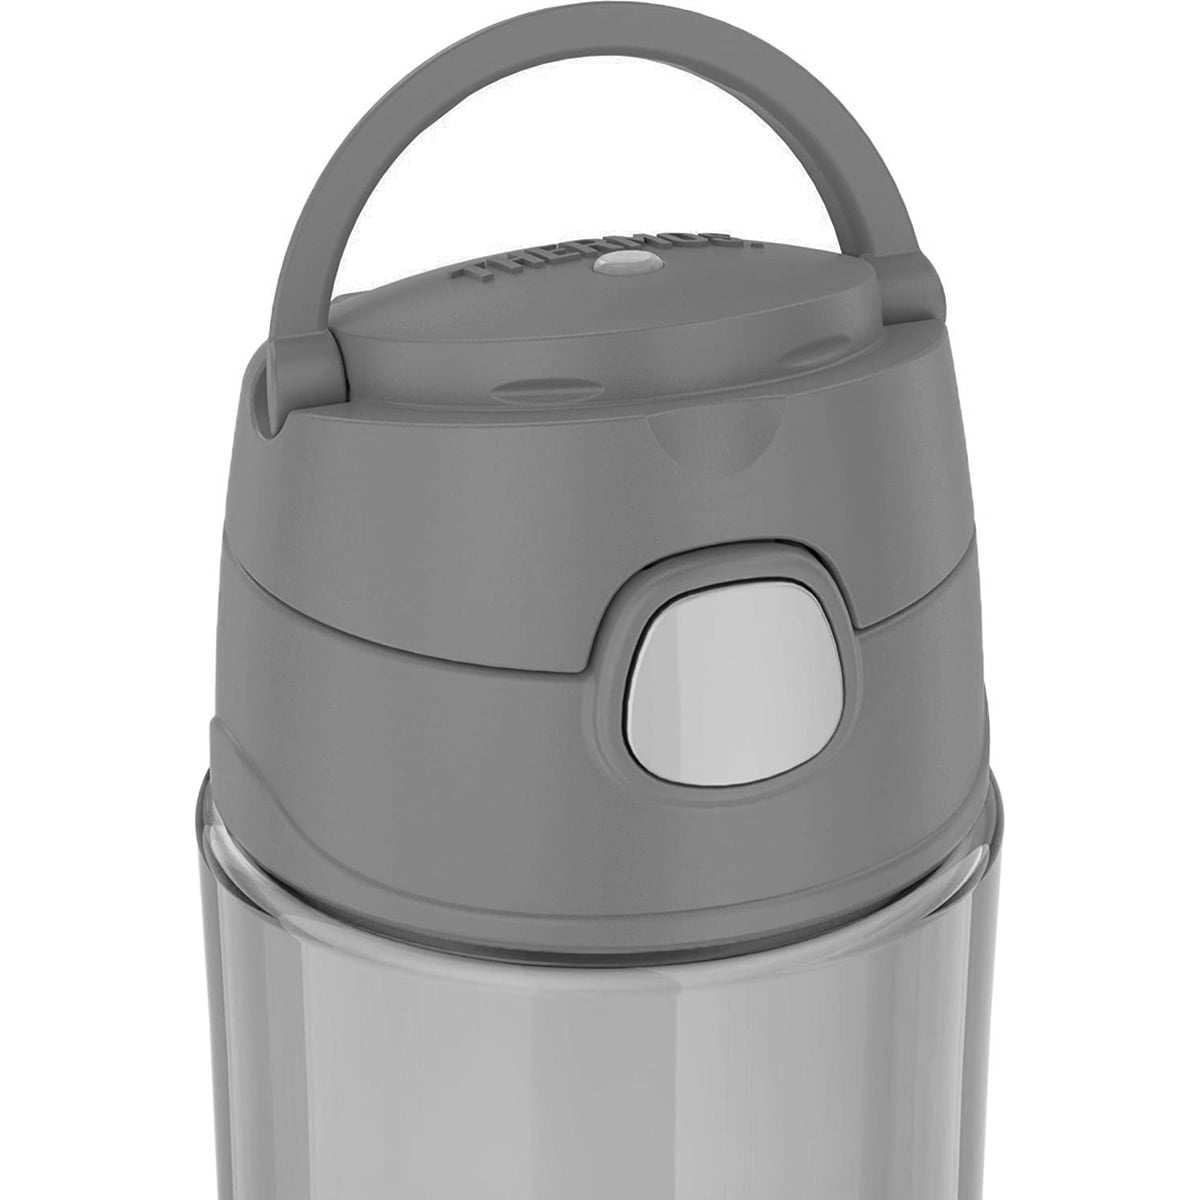 Thermos 16 oz. Kid's Funtainer Plastic Water Bottle w/ Spout Lid - Cool  Gray 